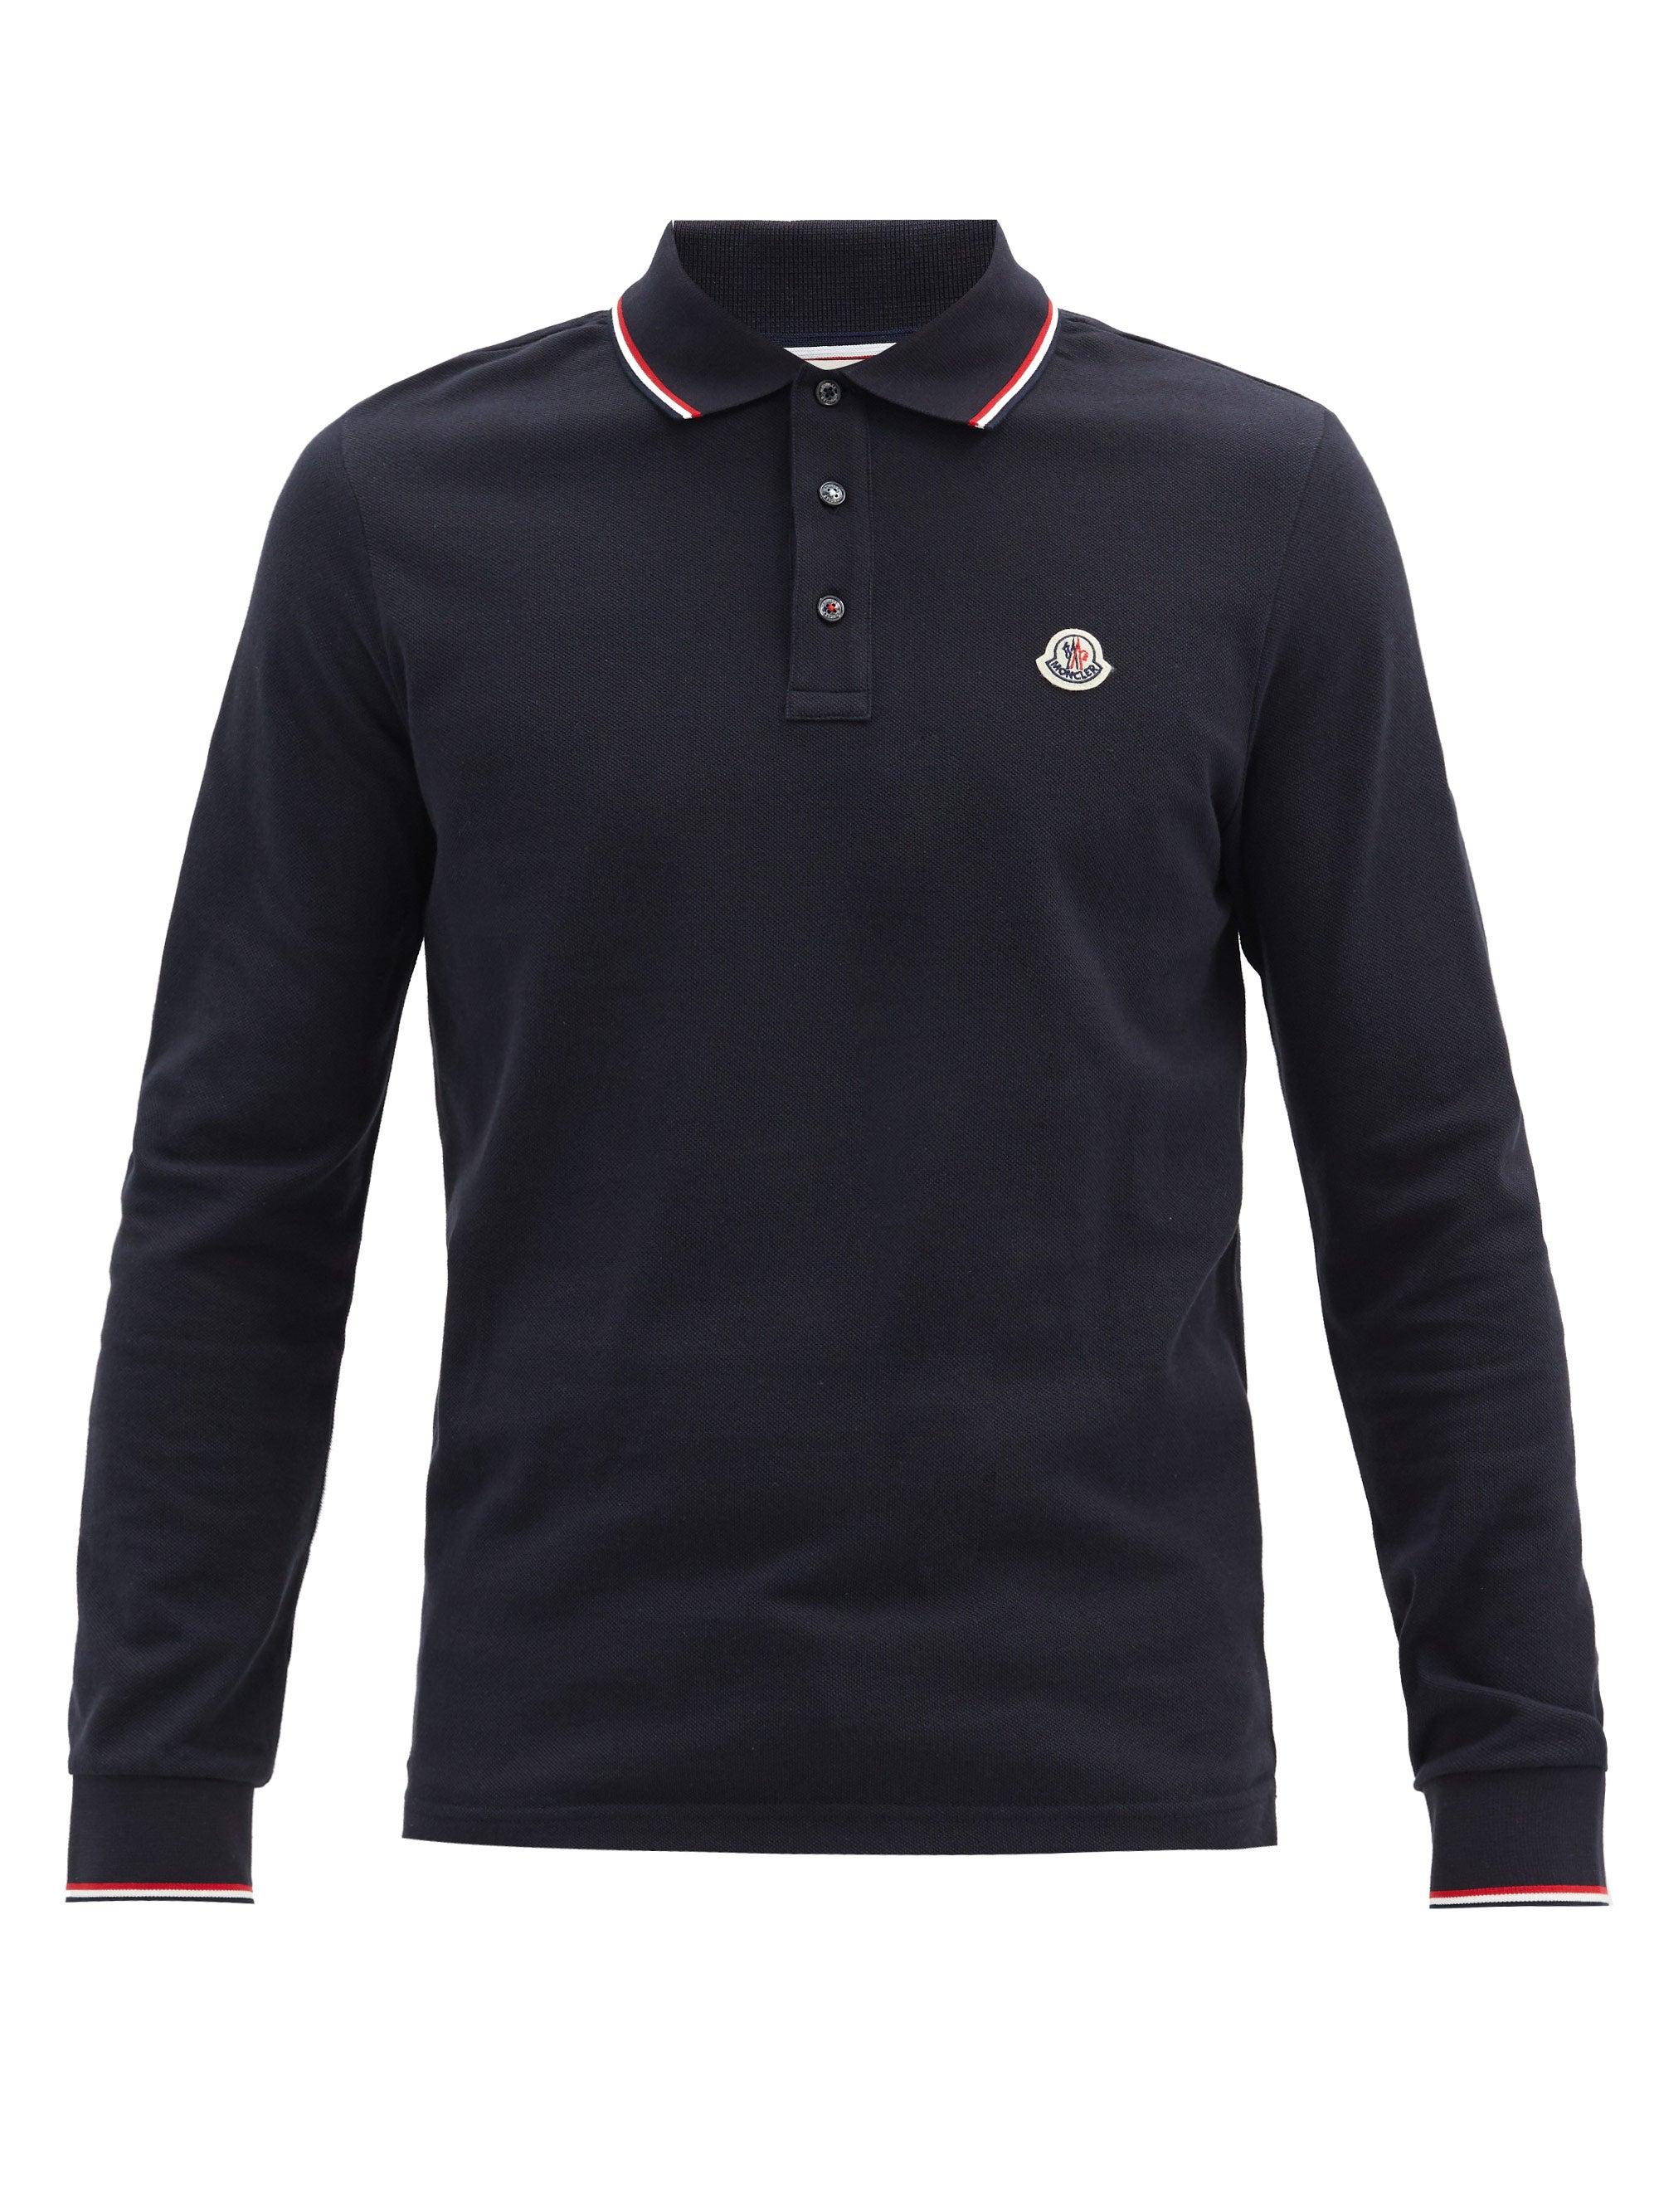 Moncler Long-sleeve Cotton Polo Shirt in Navy (Blue) for Men - Save 25% ...